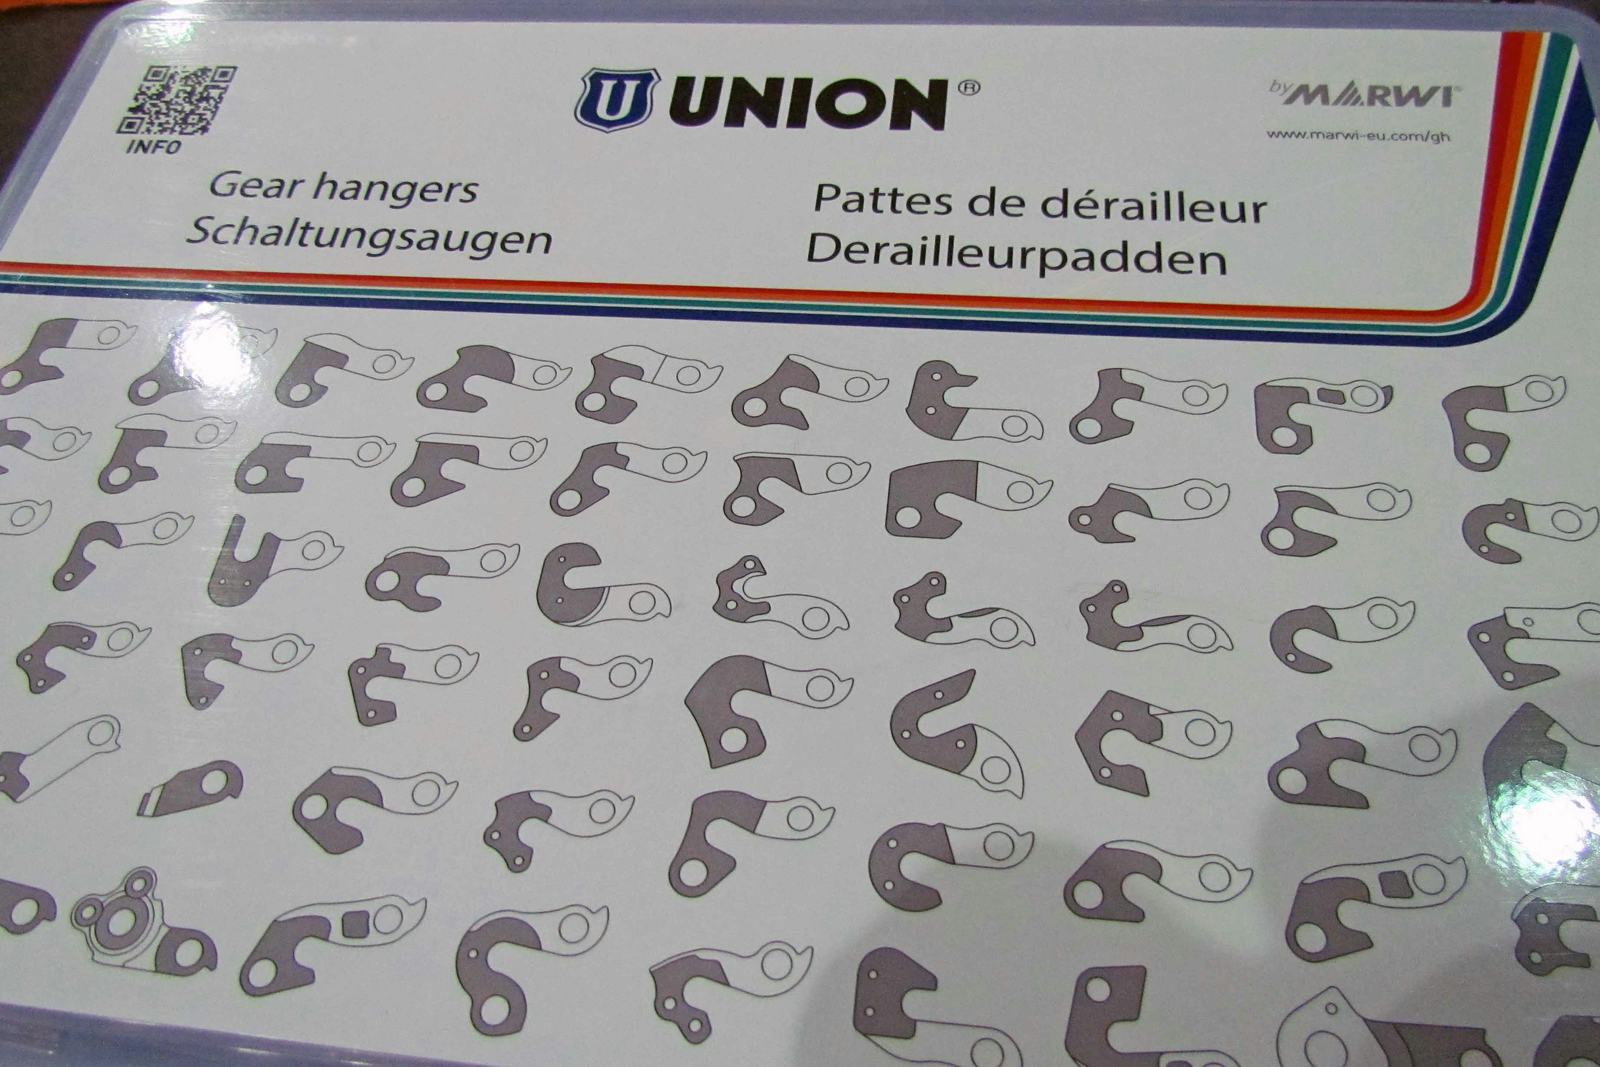 Marwi’s 20 most common gear hangers come in a box which is available from late April through wholesalers . - Photo Bike